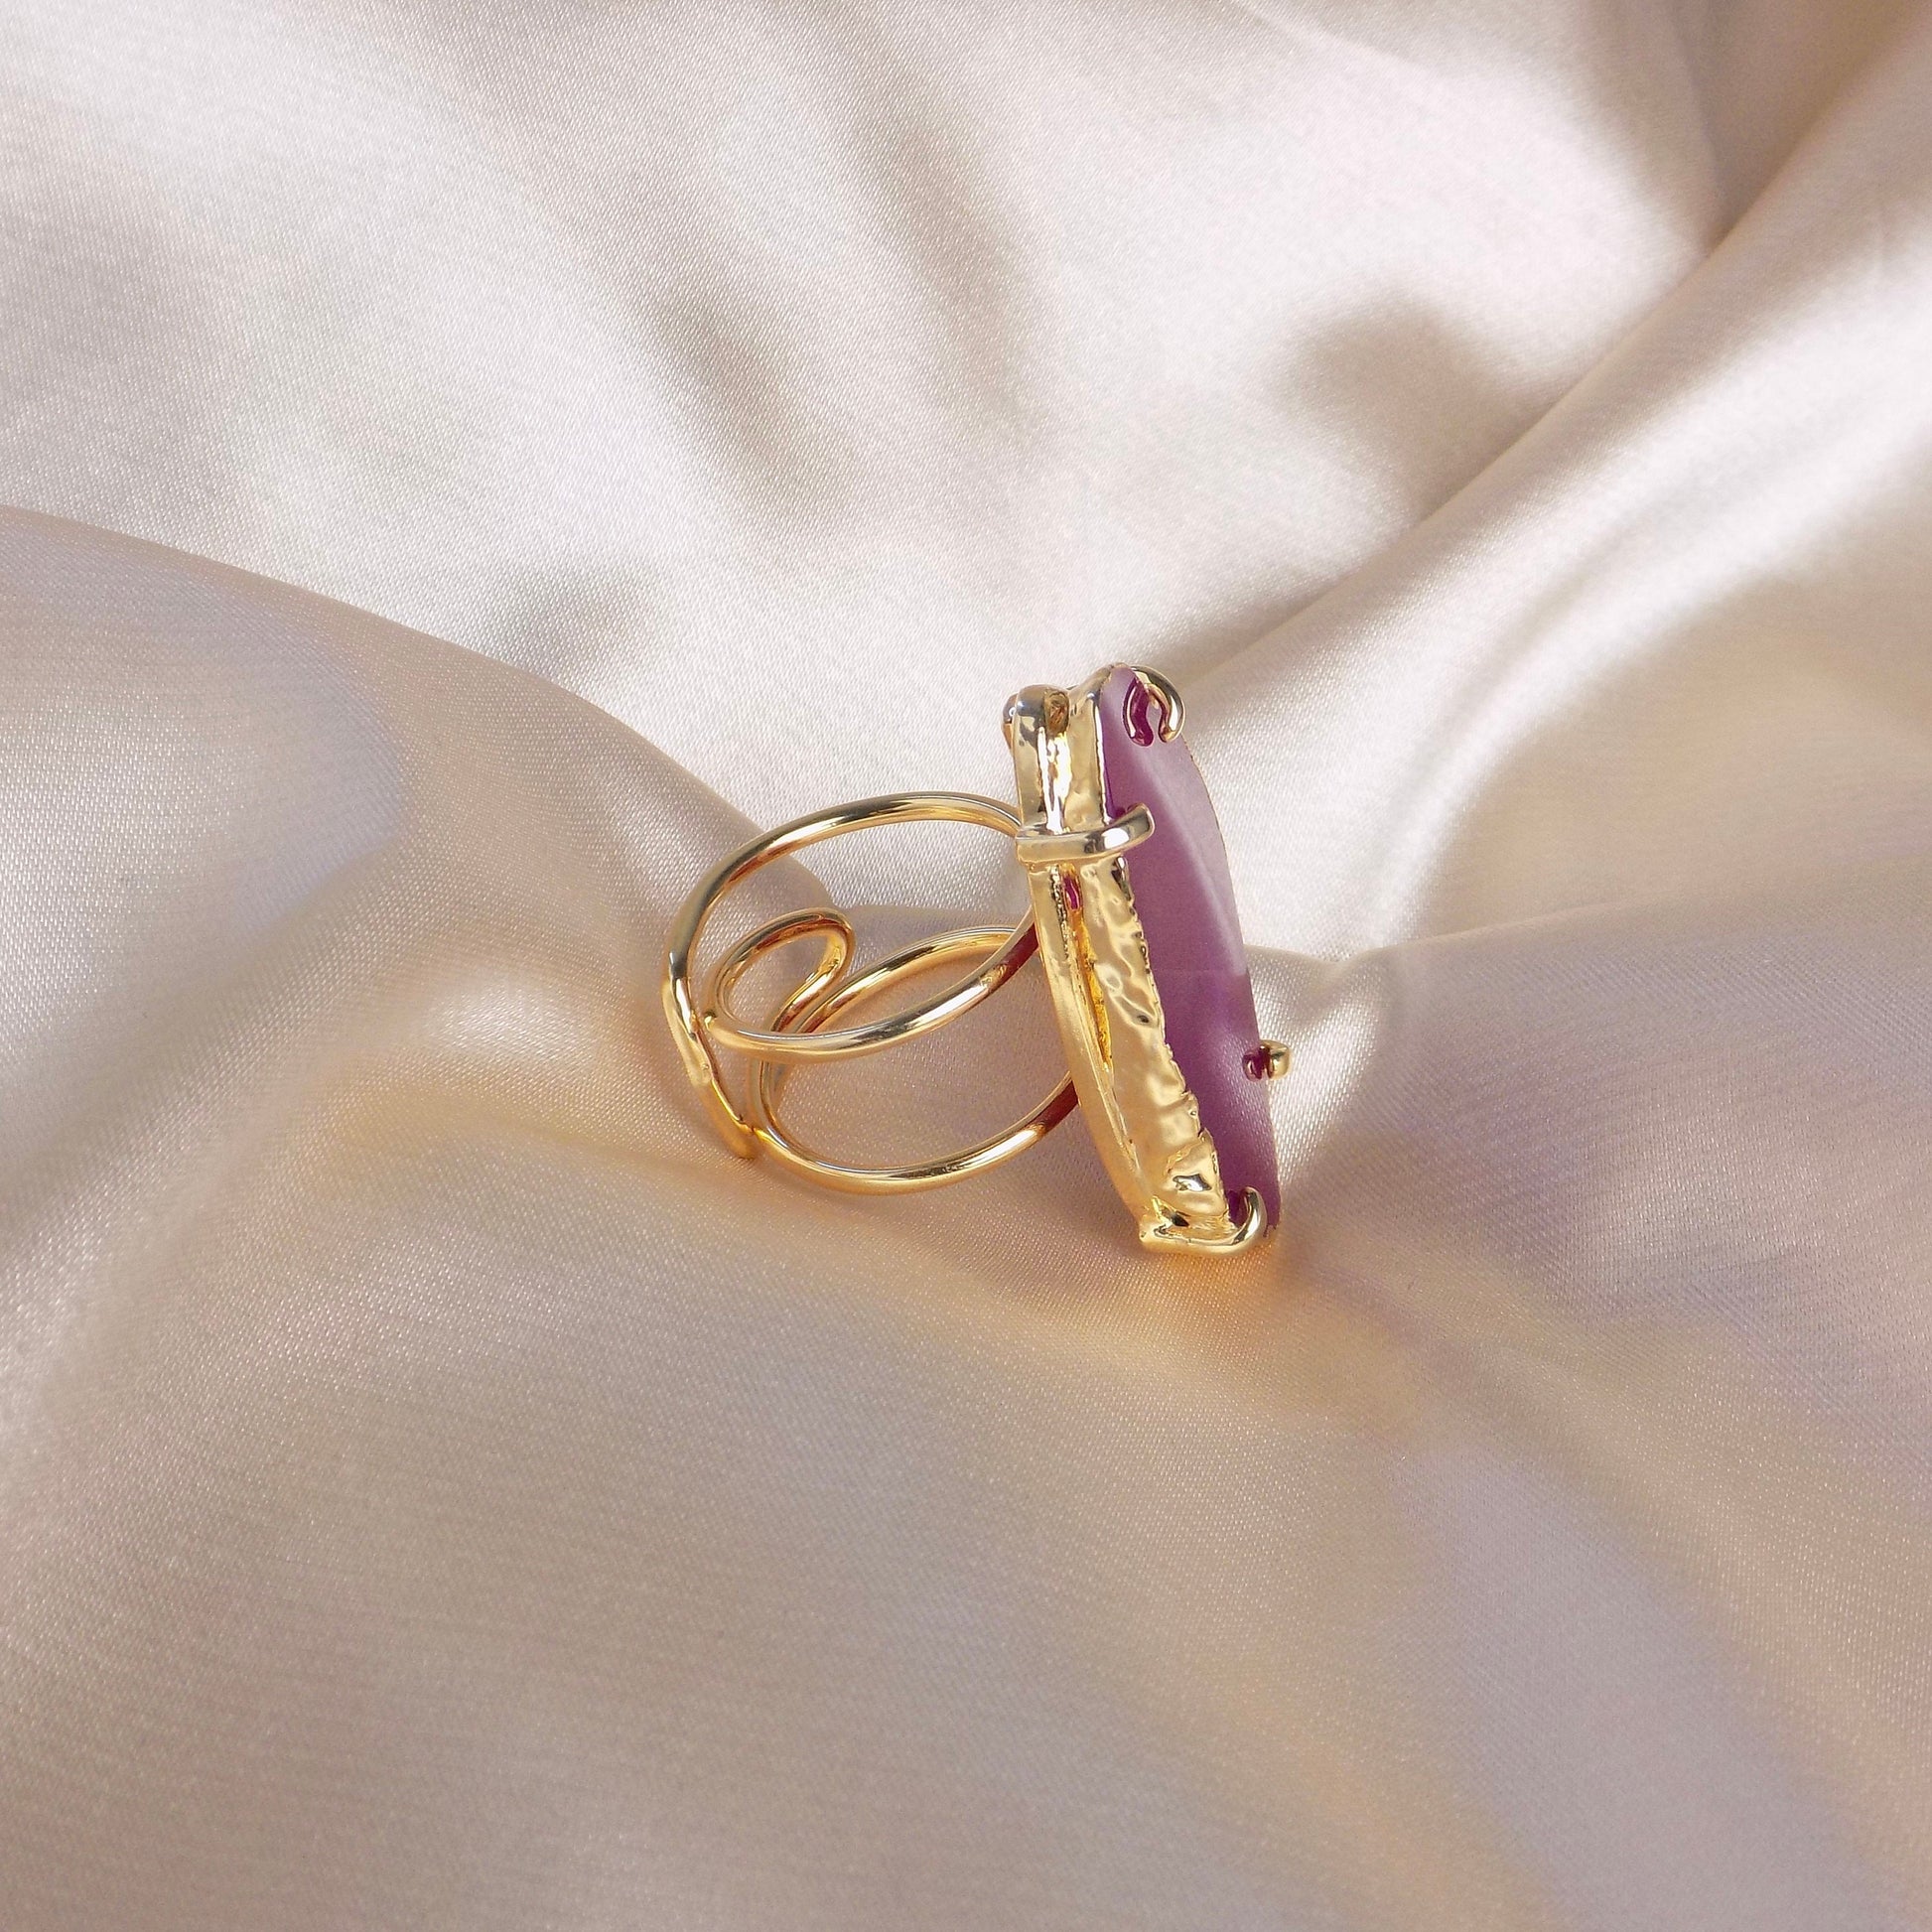 Boho Statement Ring, Hot Pink Agate Ring Gold Plated Adjustable, Geode Slice Ring, Unique Crystal, Christmas Gifts Her, G15-110